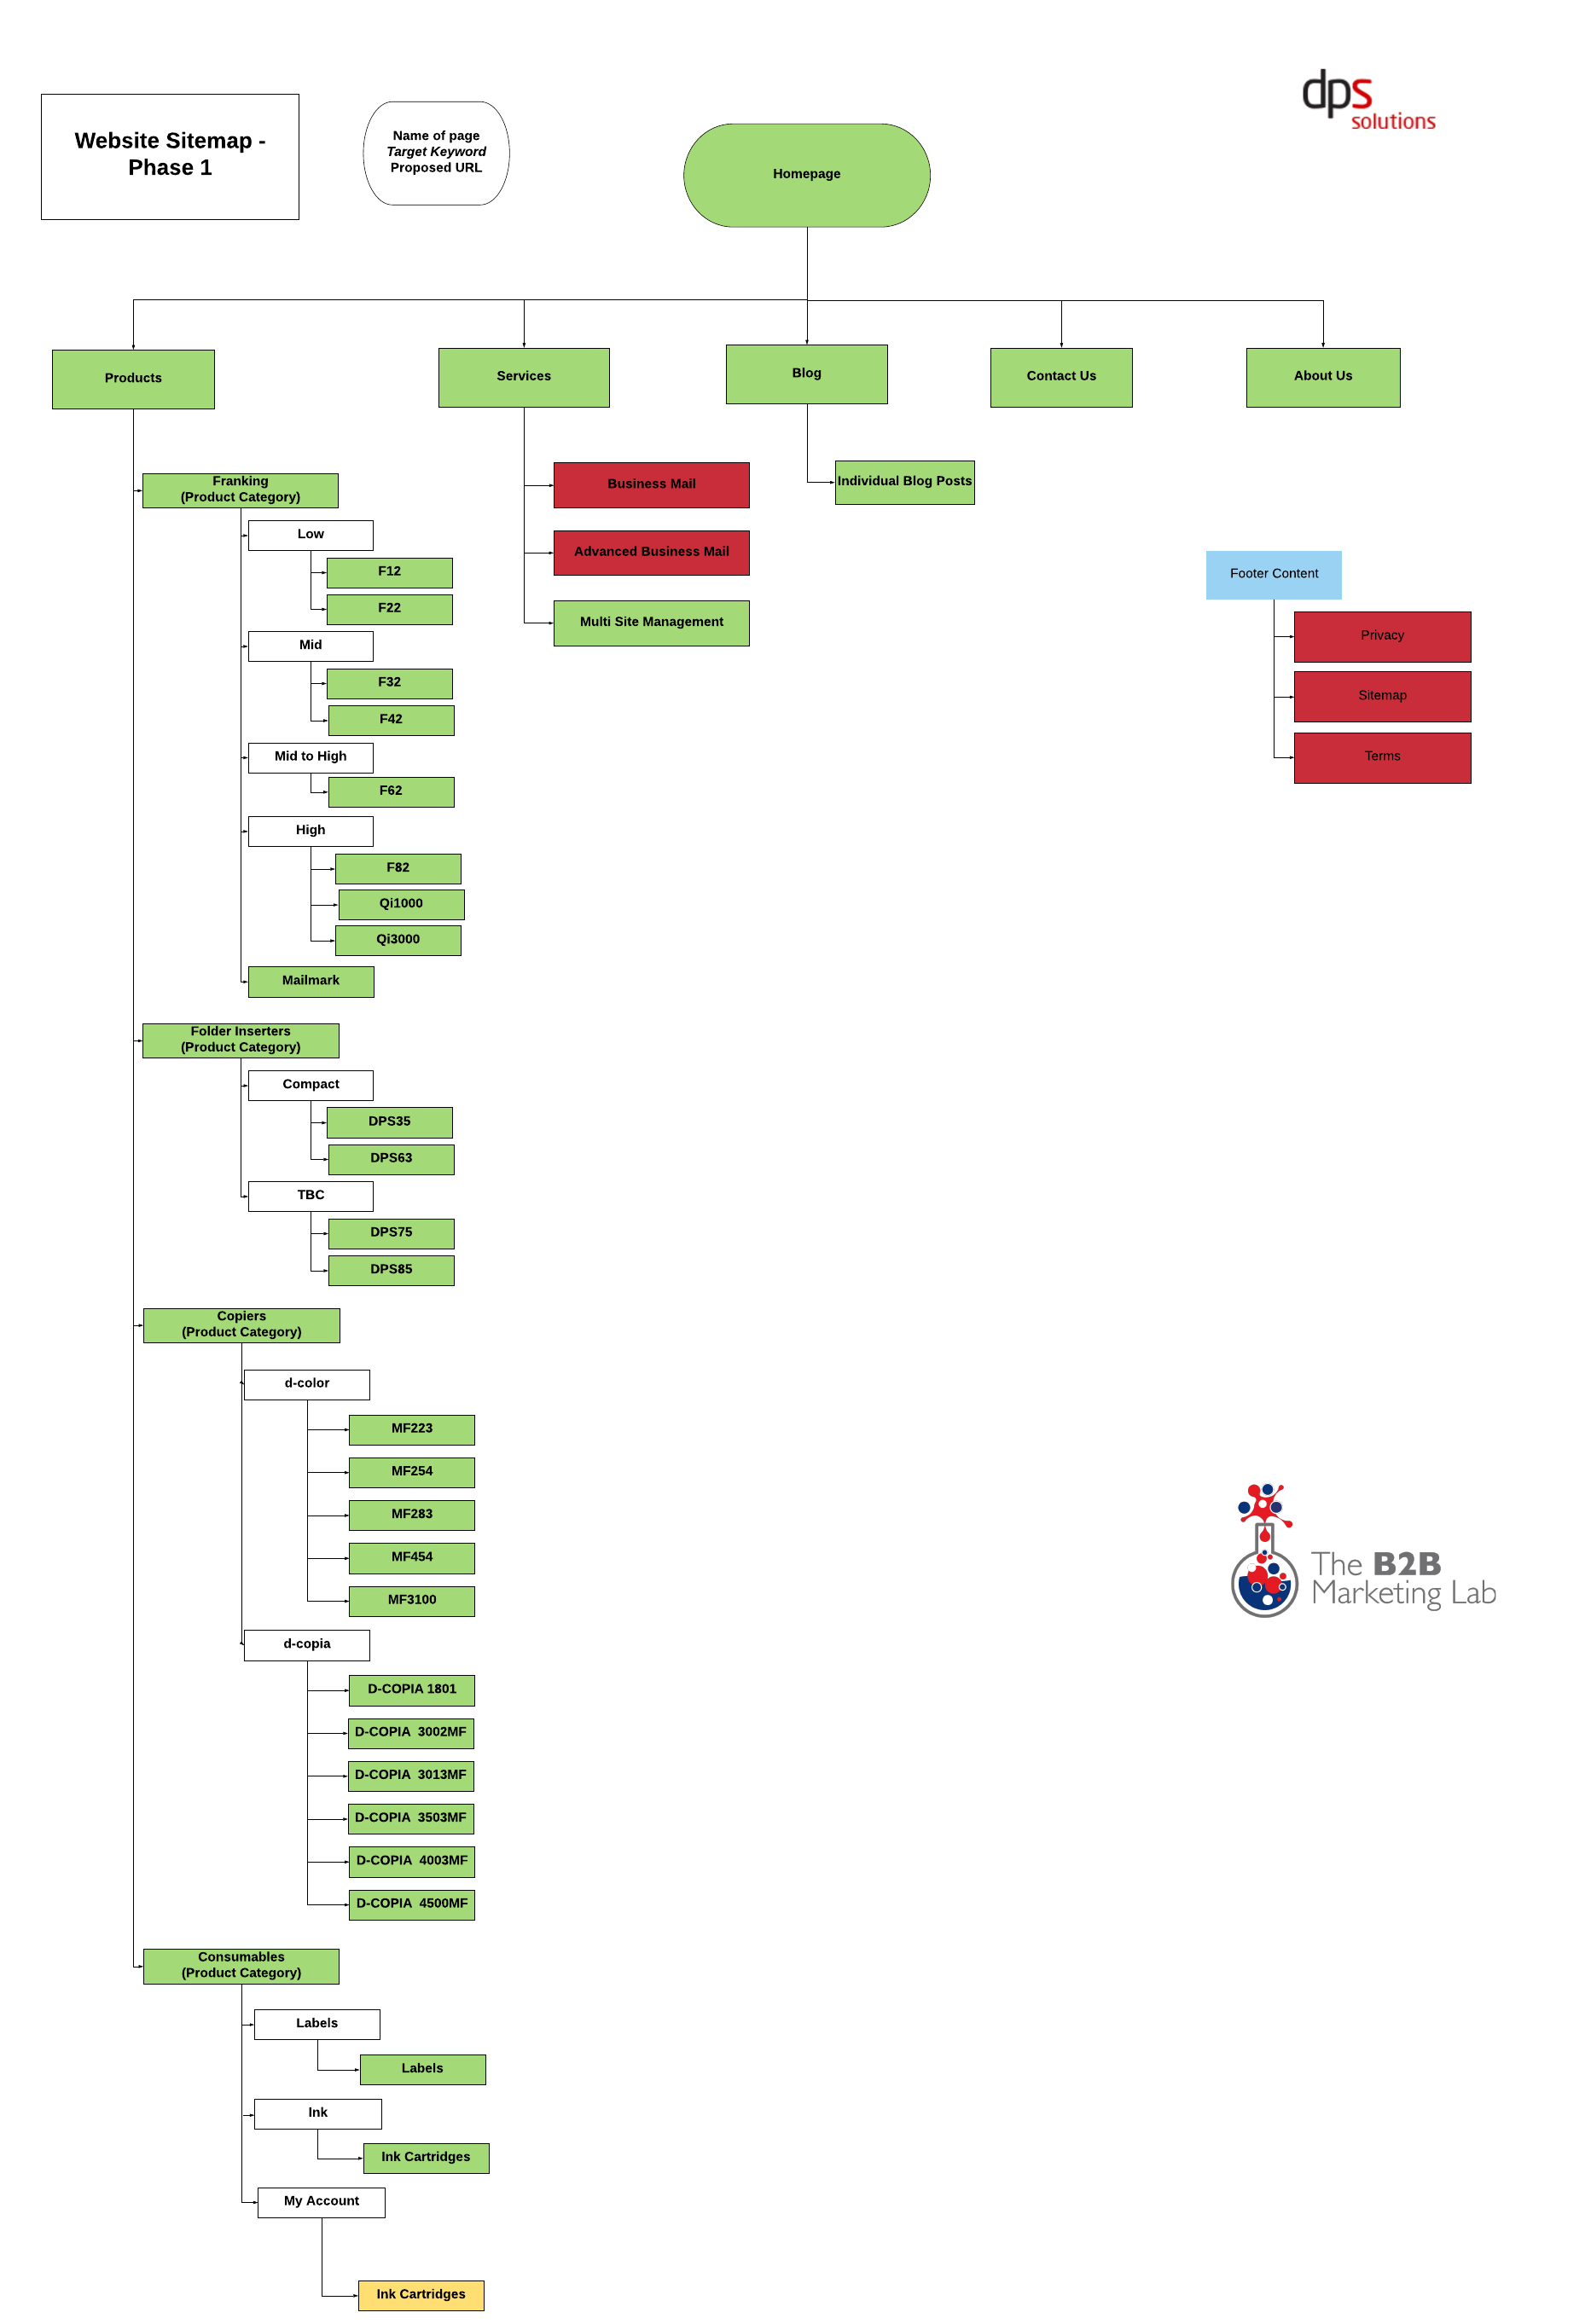 Copy of DPS Sitemap (For use in Case Study) - Page 1-1